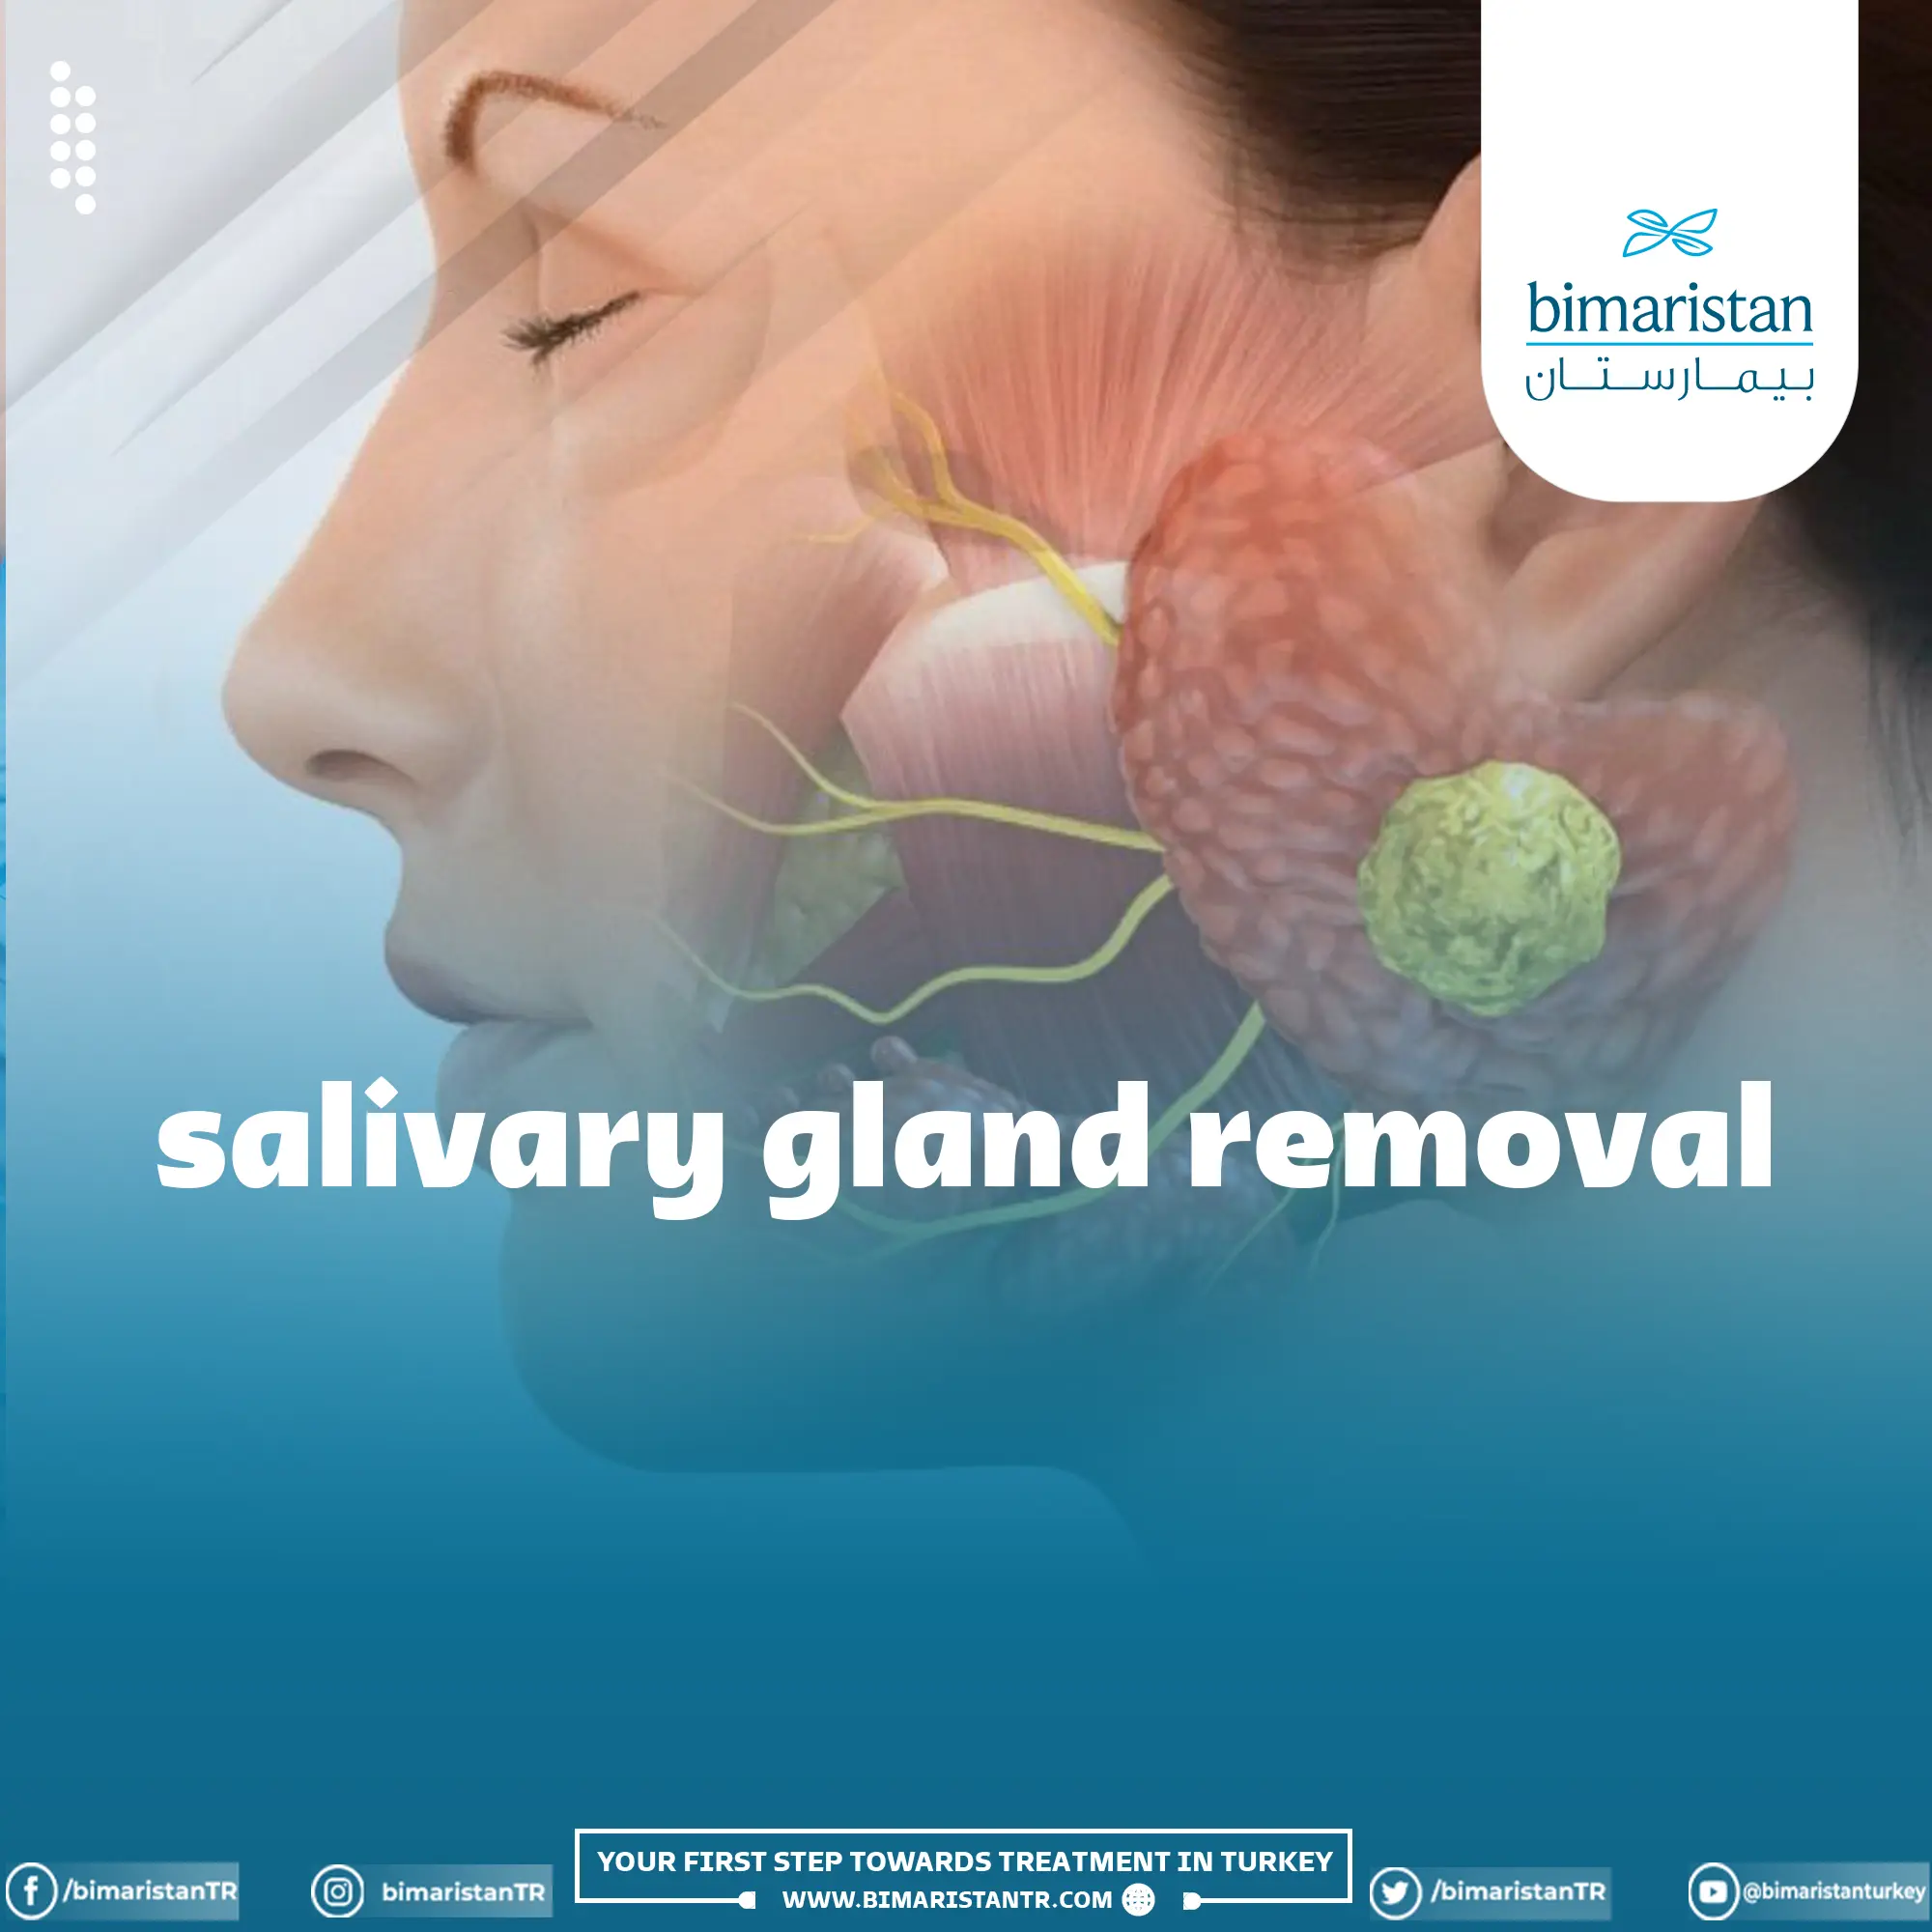 Salivary gland removal and its risks